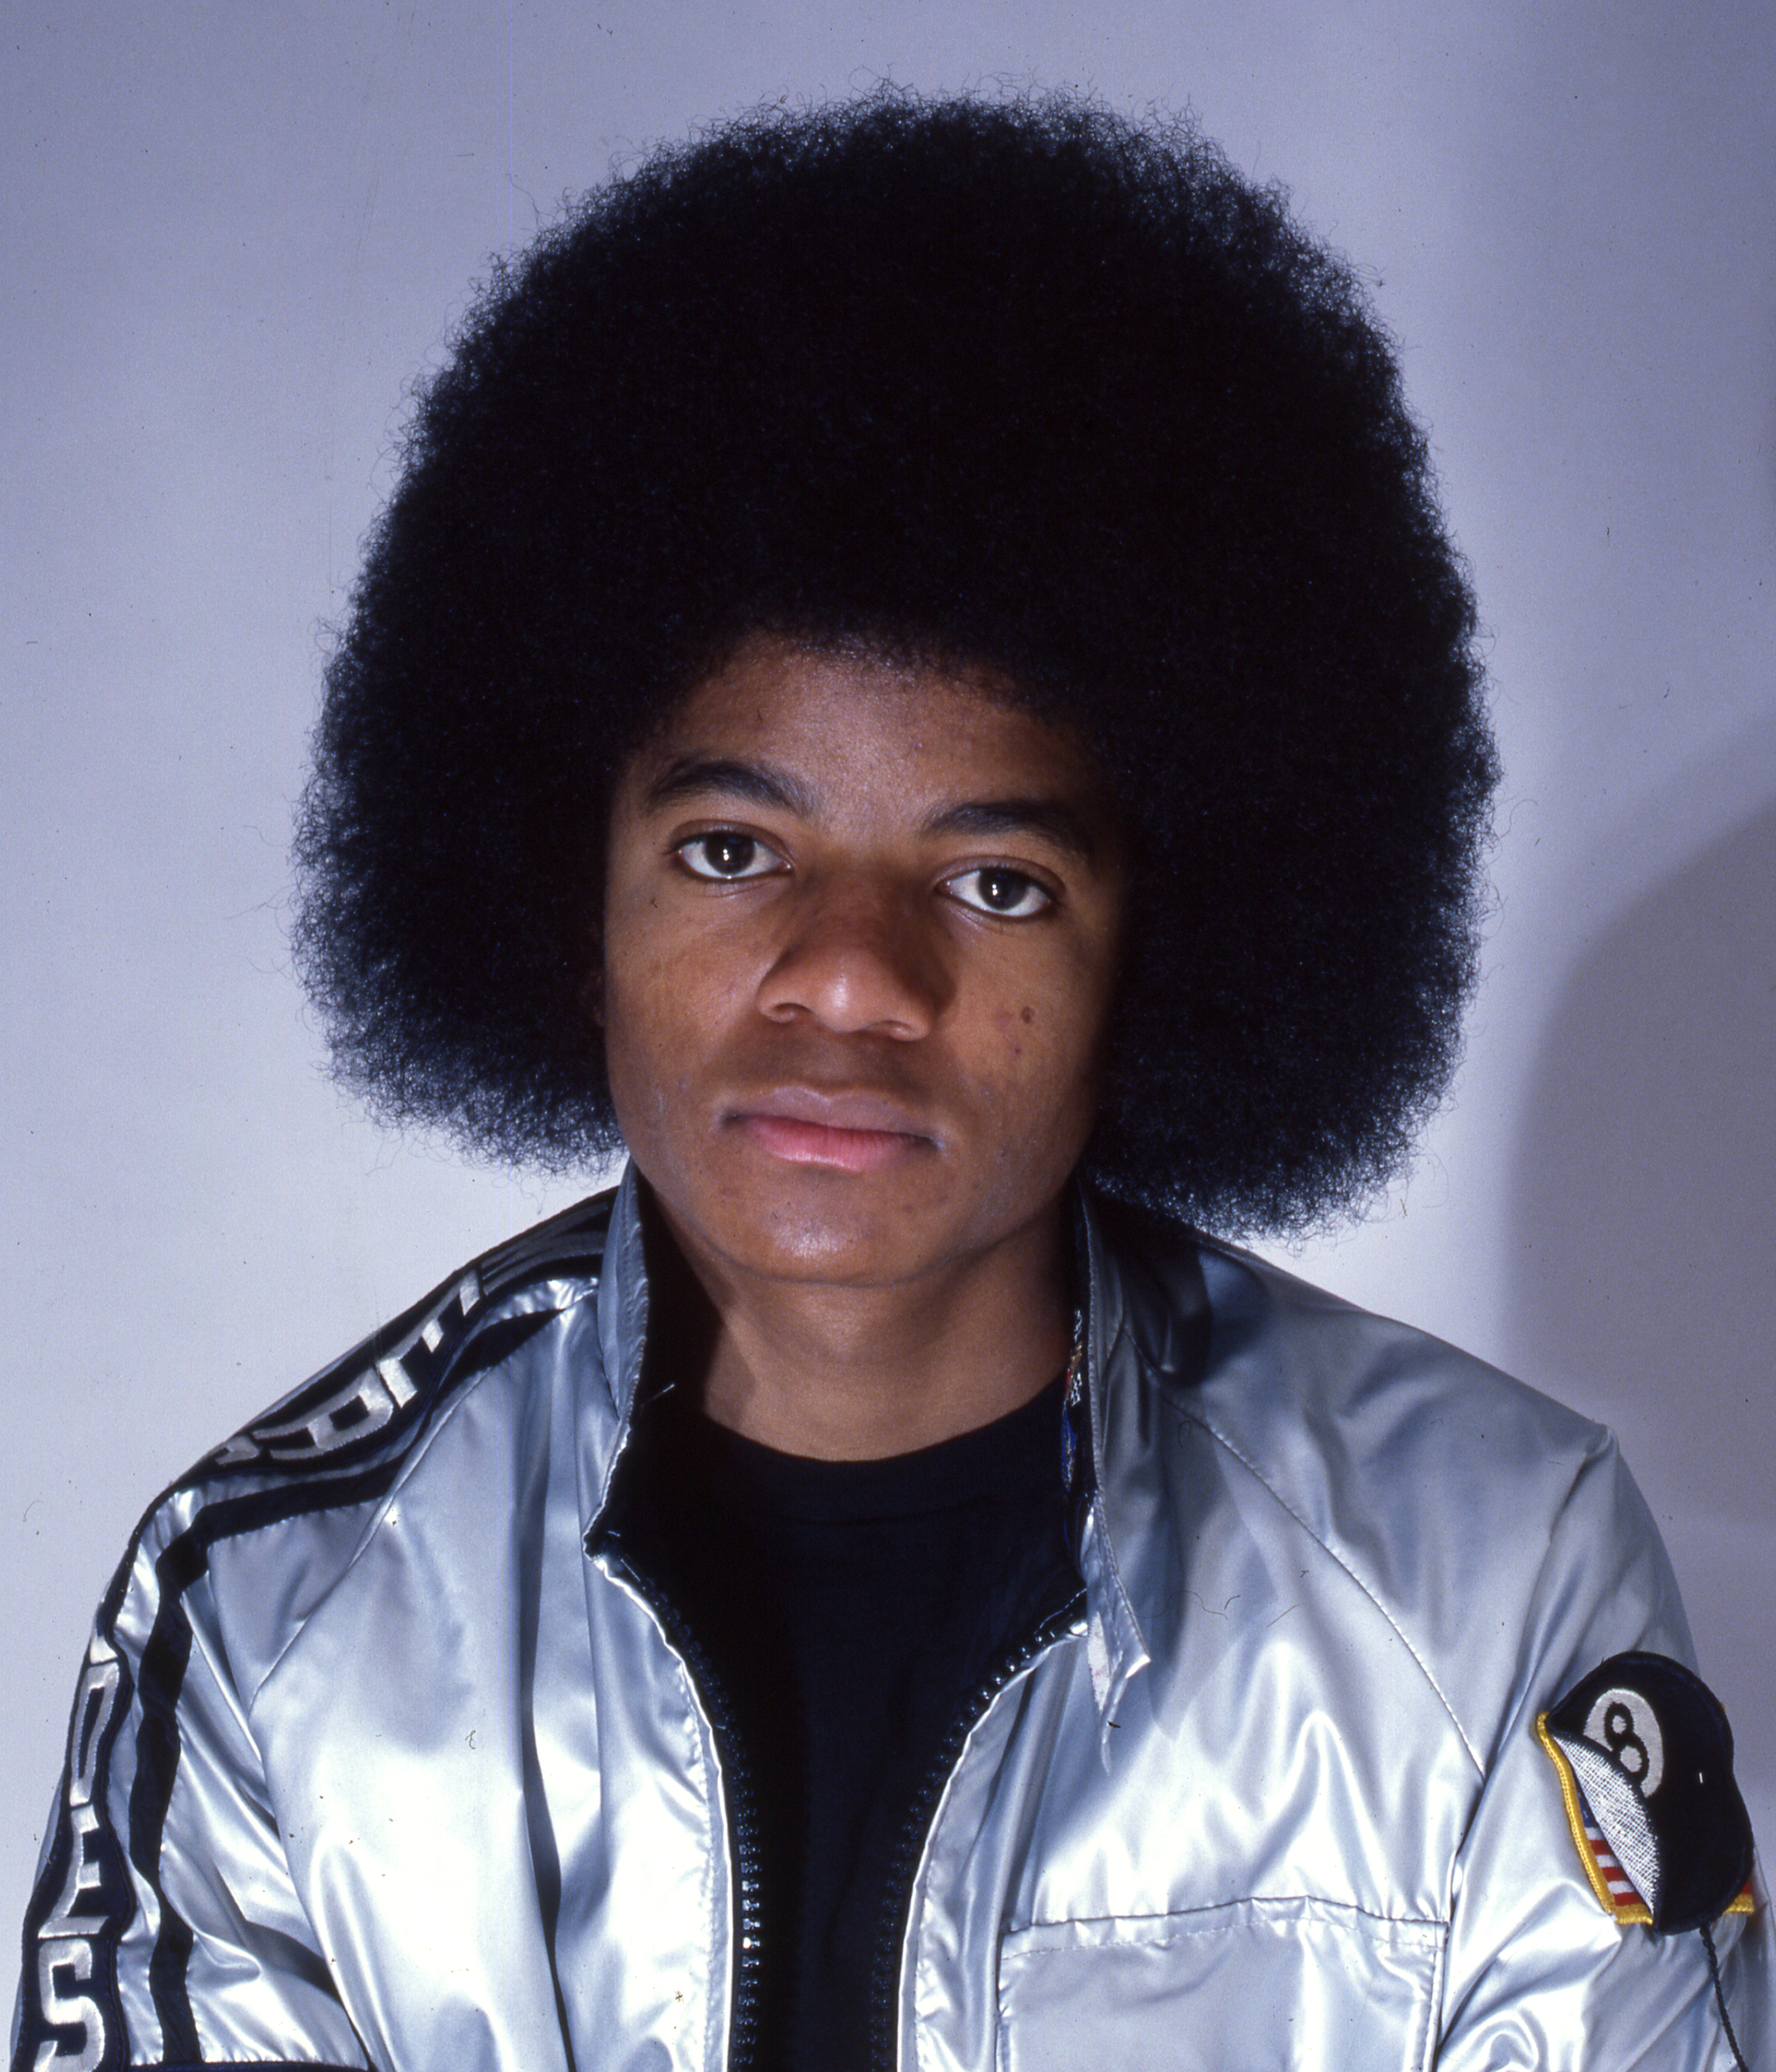 Michael Jackson in 1977 | Source: Getty Images